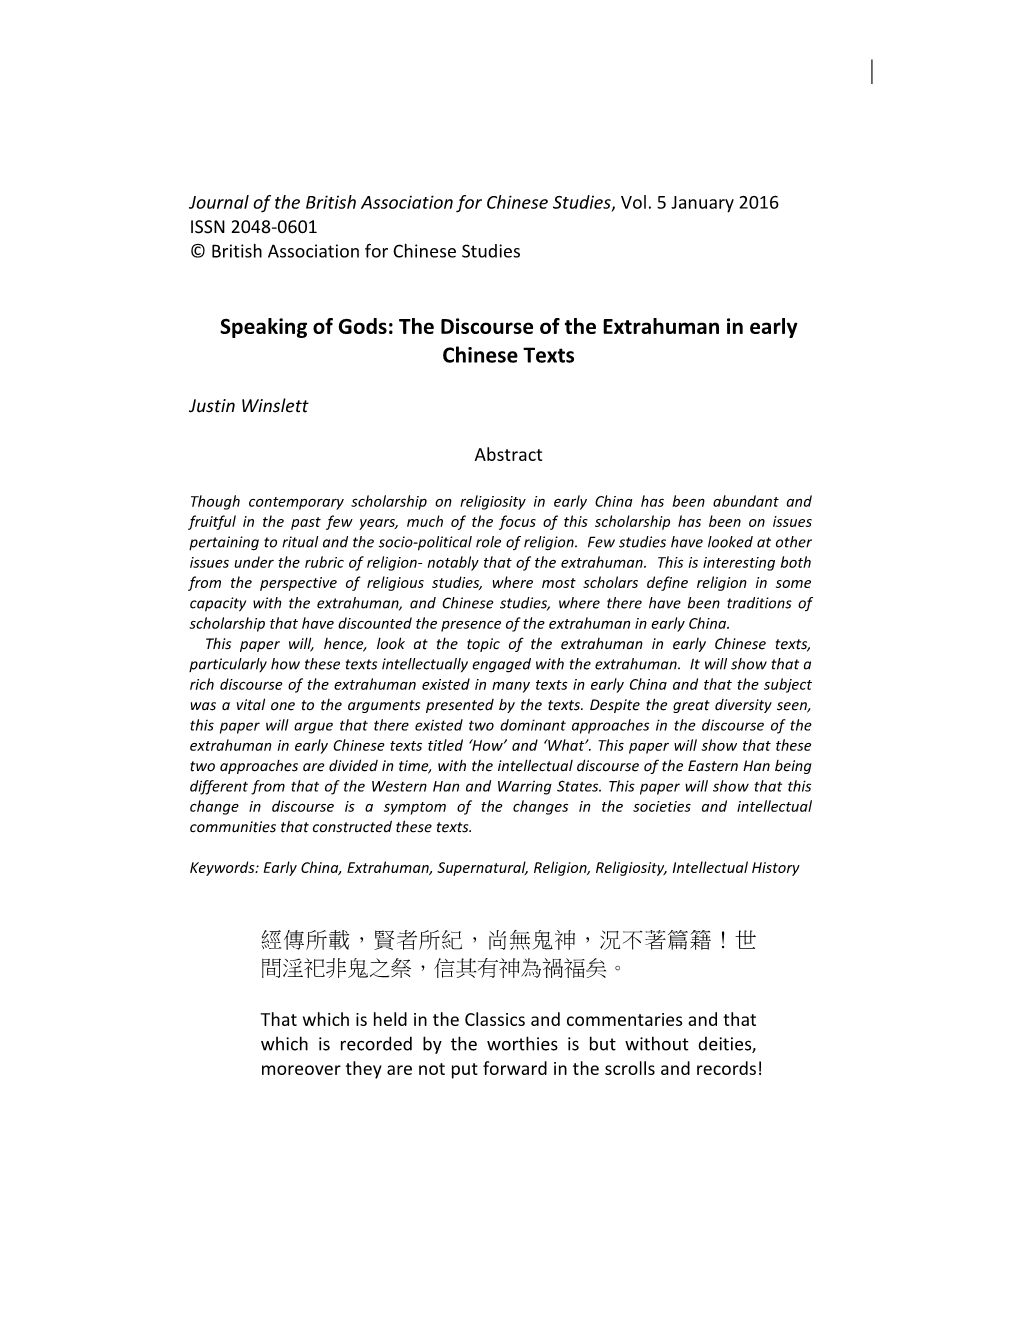 The Discourse of the Extrahuman in Early Chinese Texts